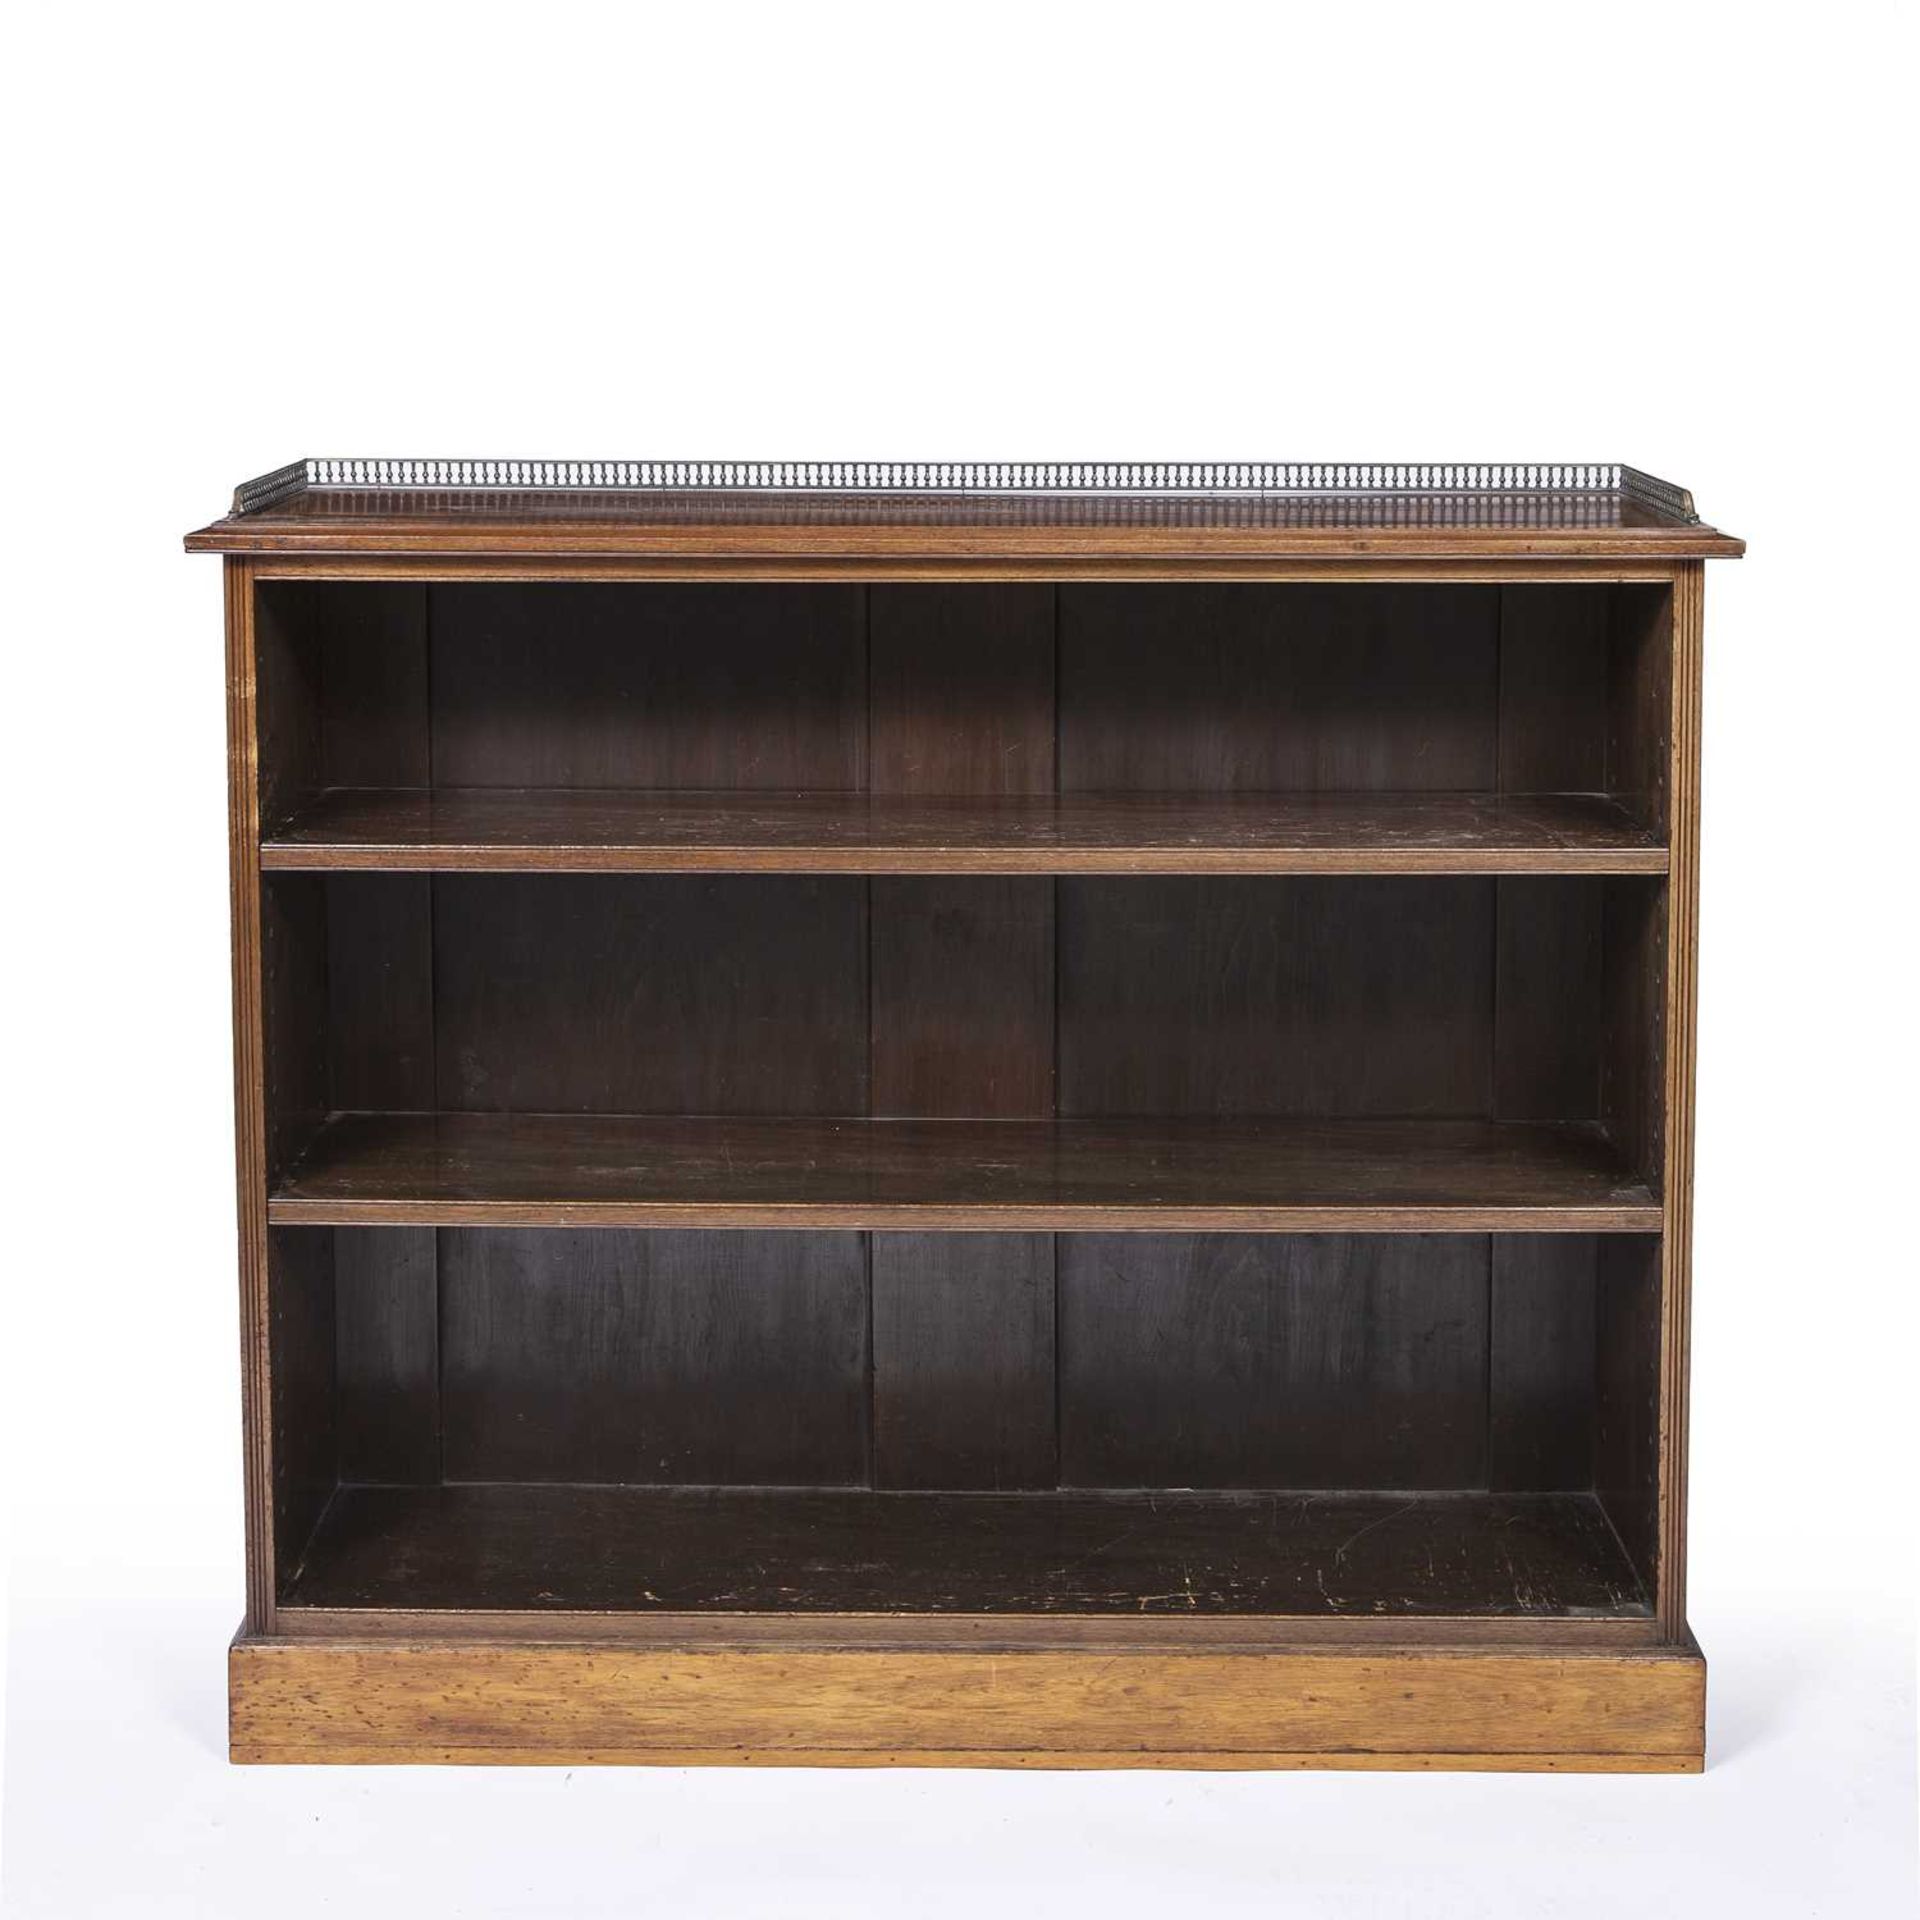 A 19th century mahogany open front bookcase with a brass gallery and two shelves. 124cm wide 33cm